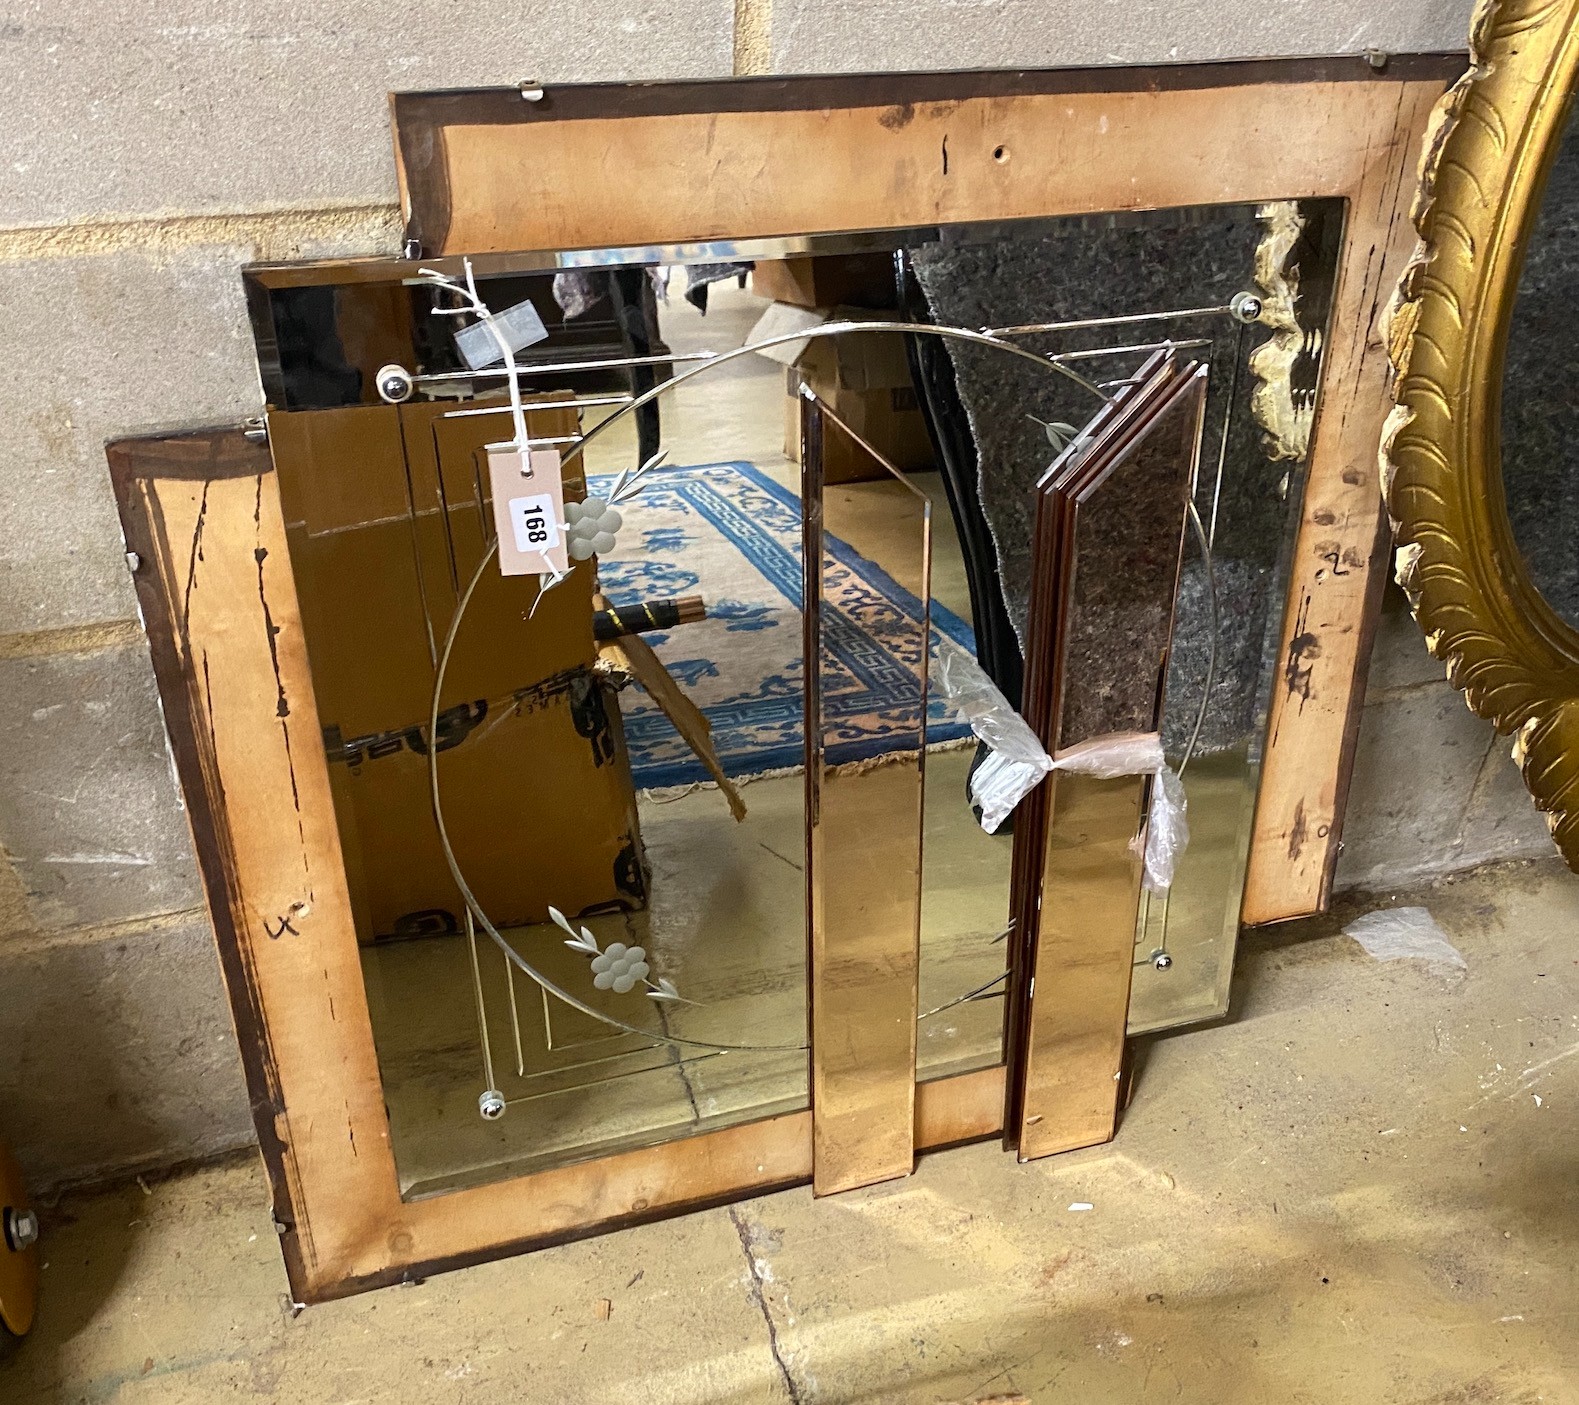 An Art Deco style peach and clear glass wall mirror, width 78cm, height 77cm